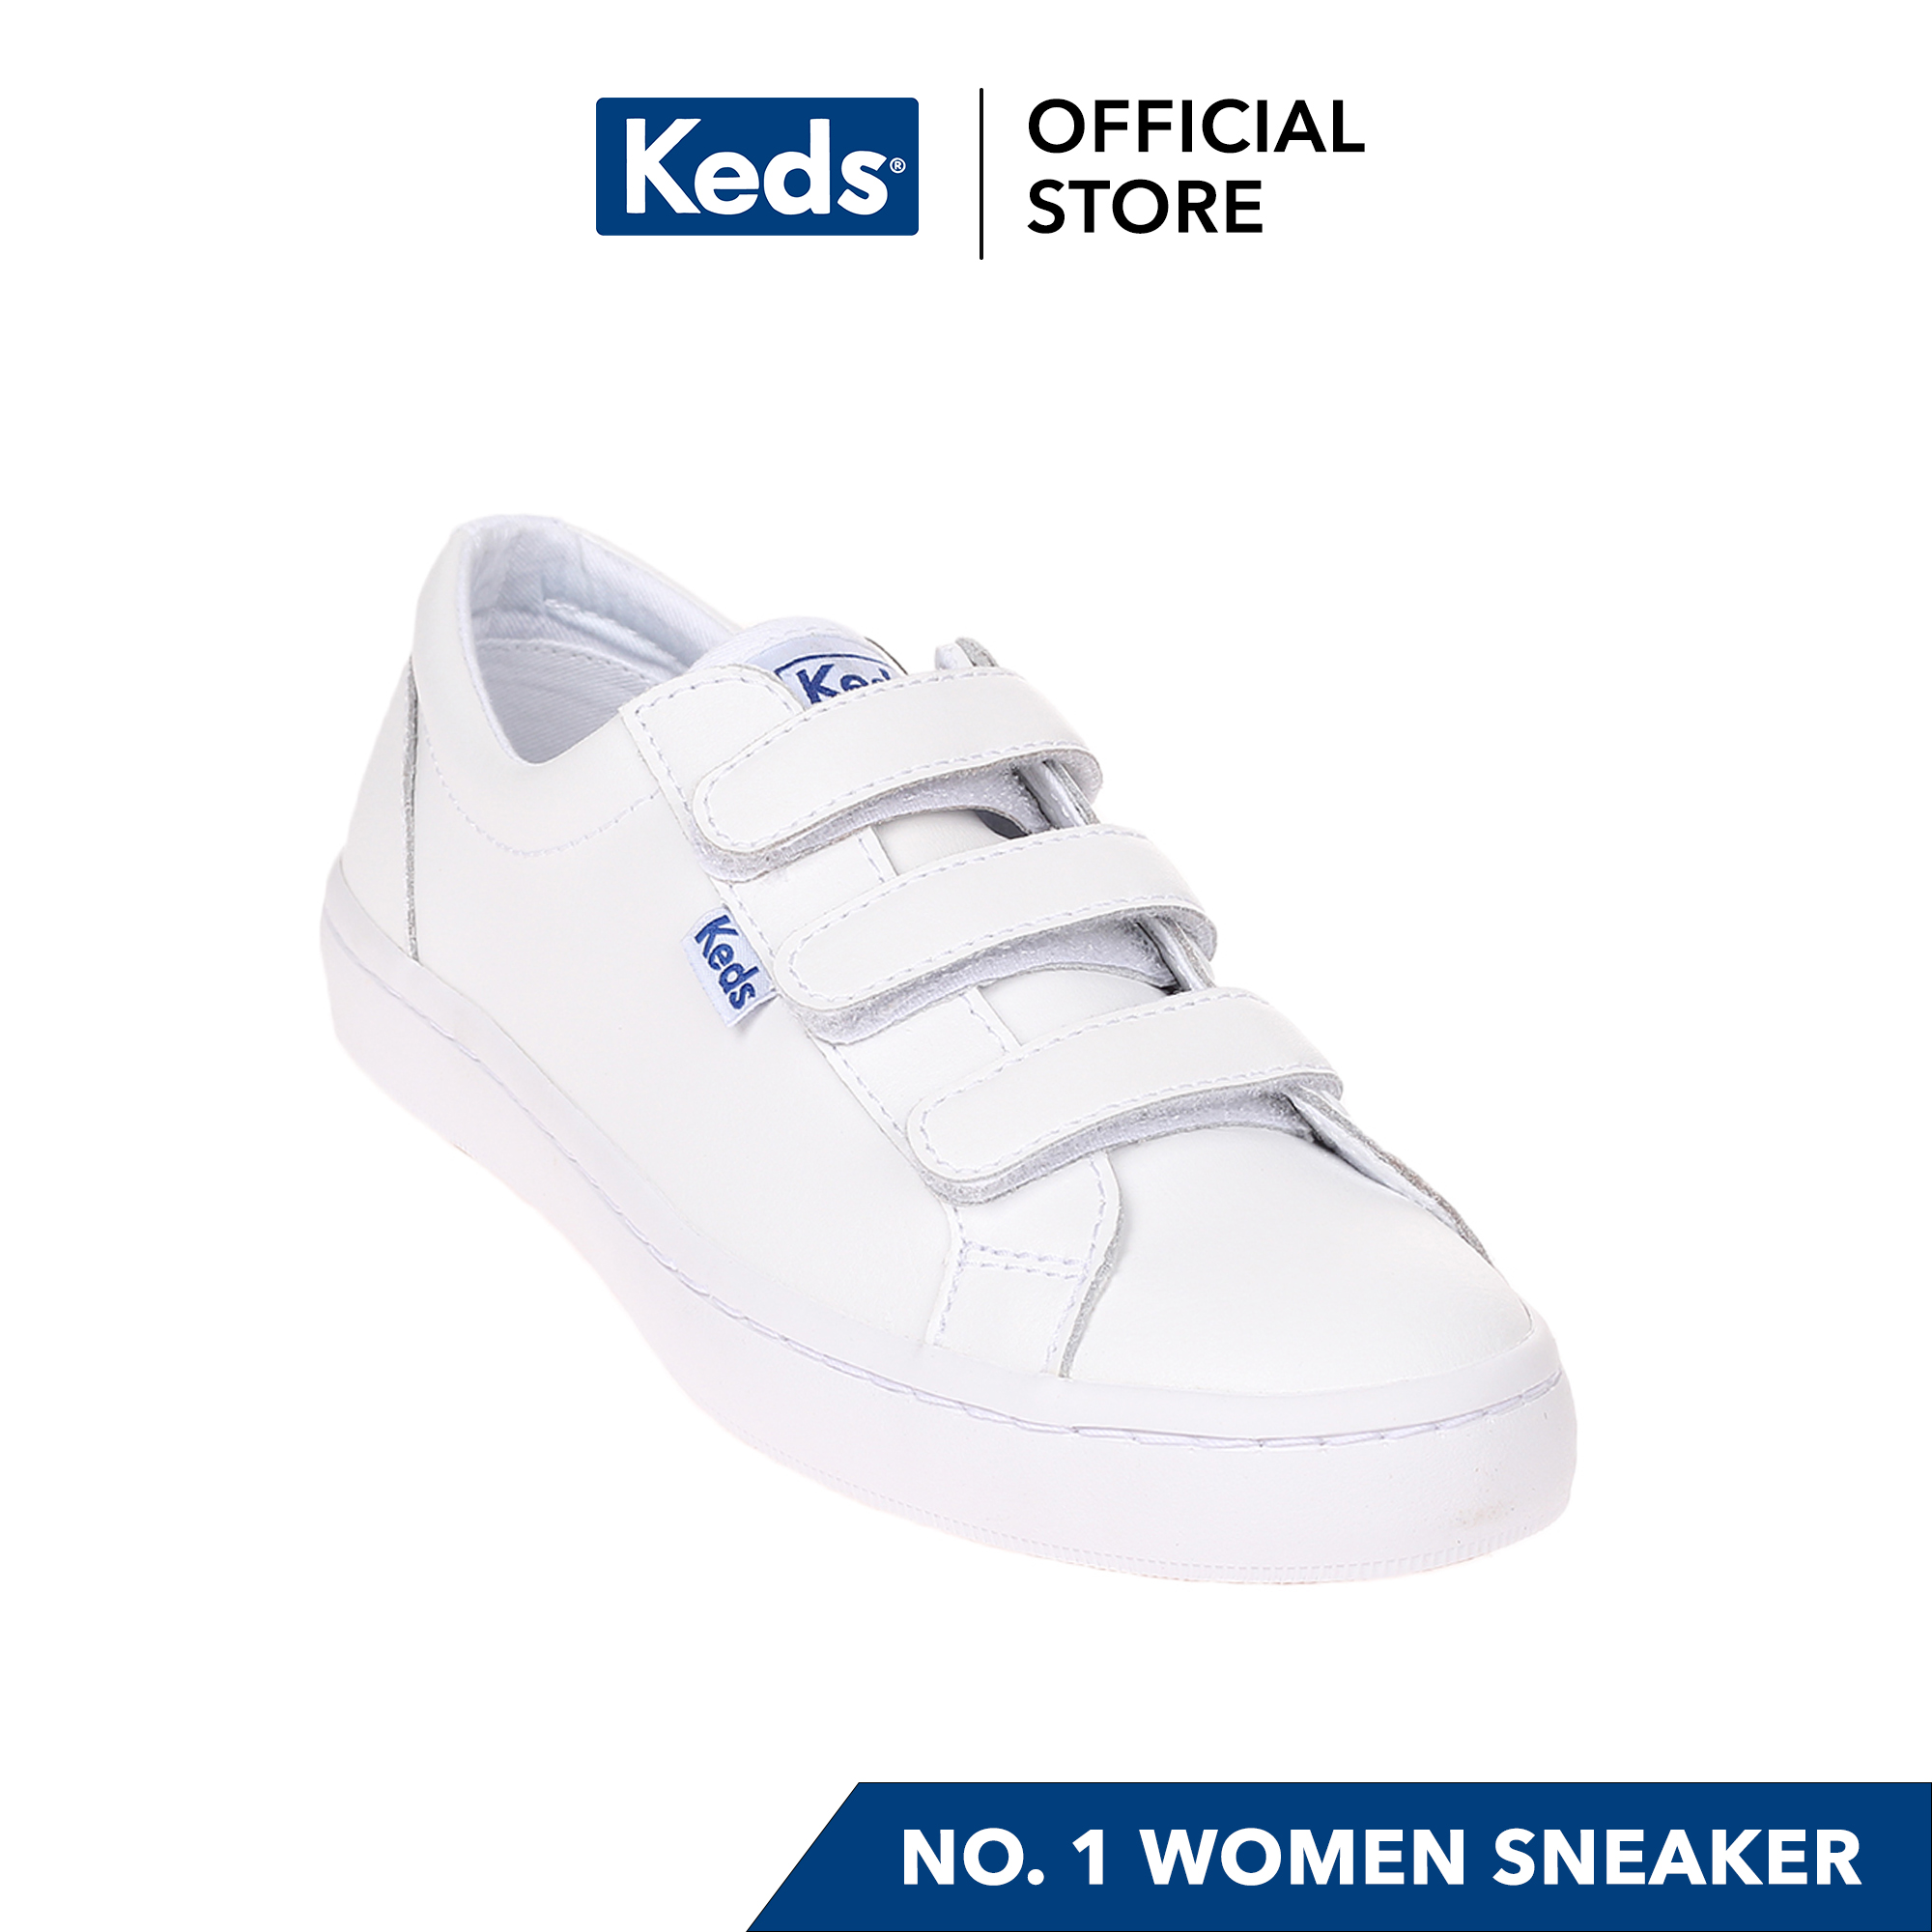 where can i find keds sneakers